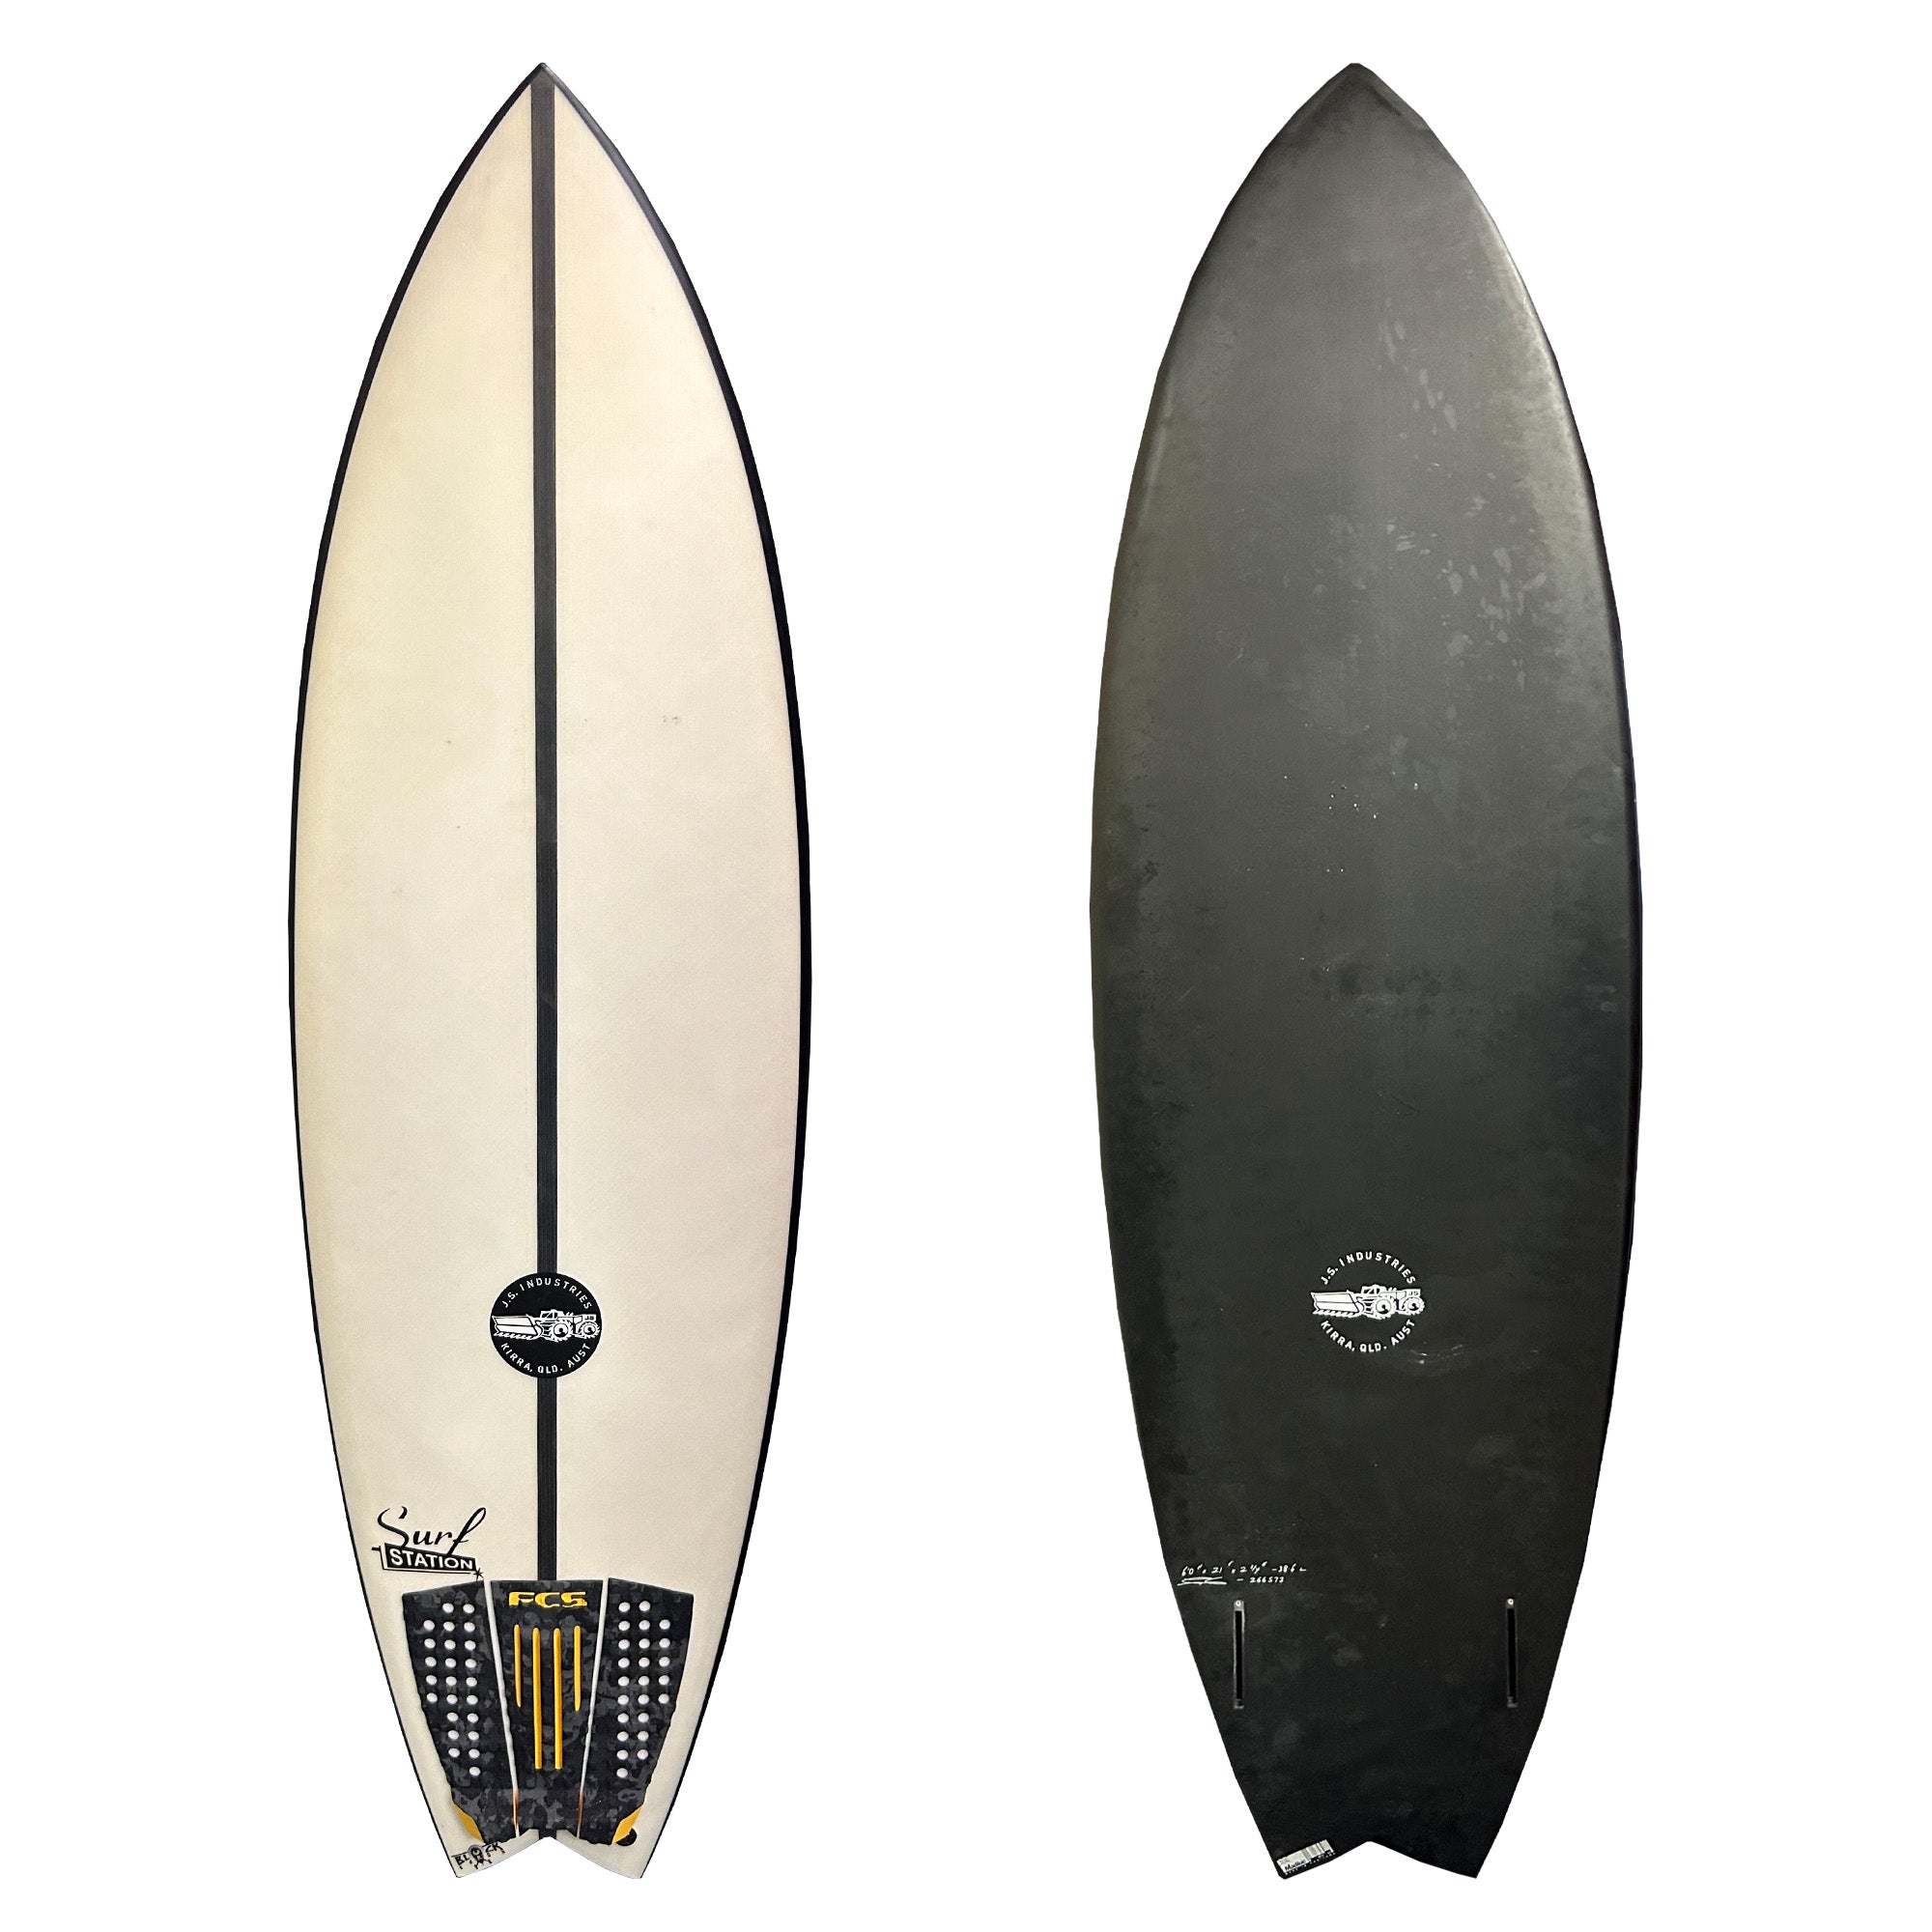 JS Industries Black Baron 6' Consignment Surfboard